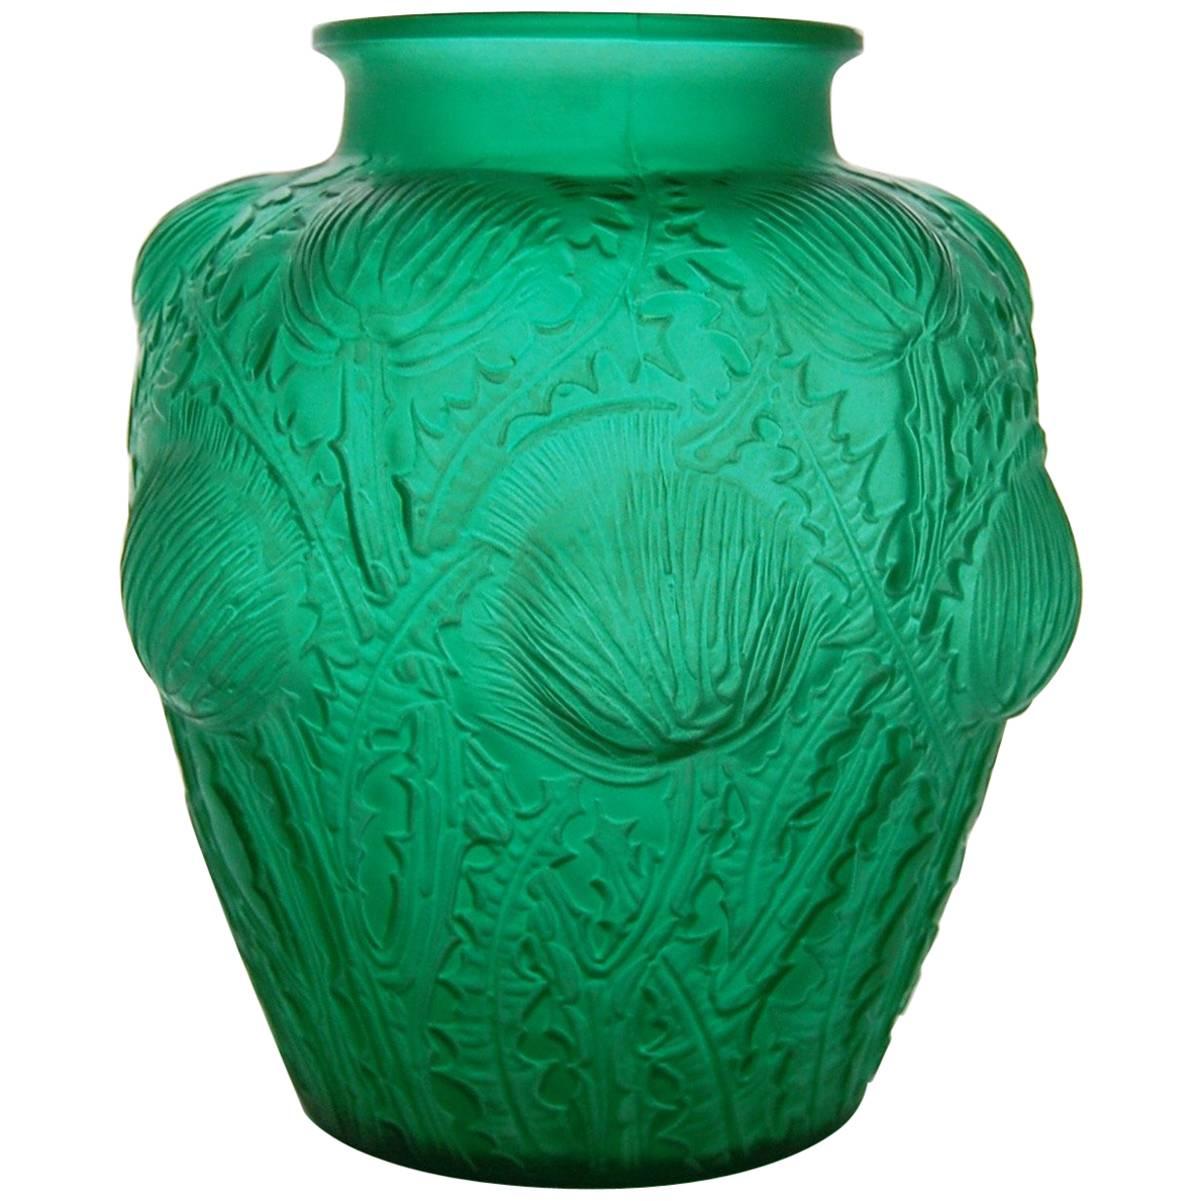 Rare to Find Green ‘Domremy’ Vase by R. Lalique For Sale